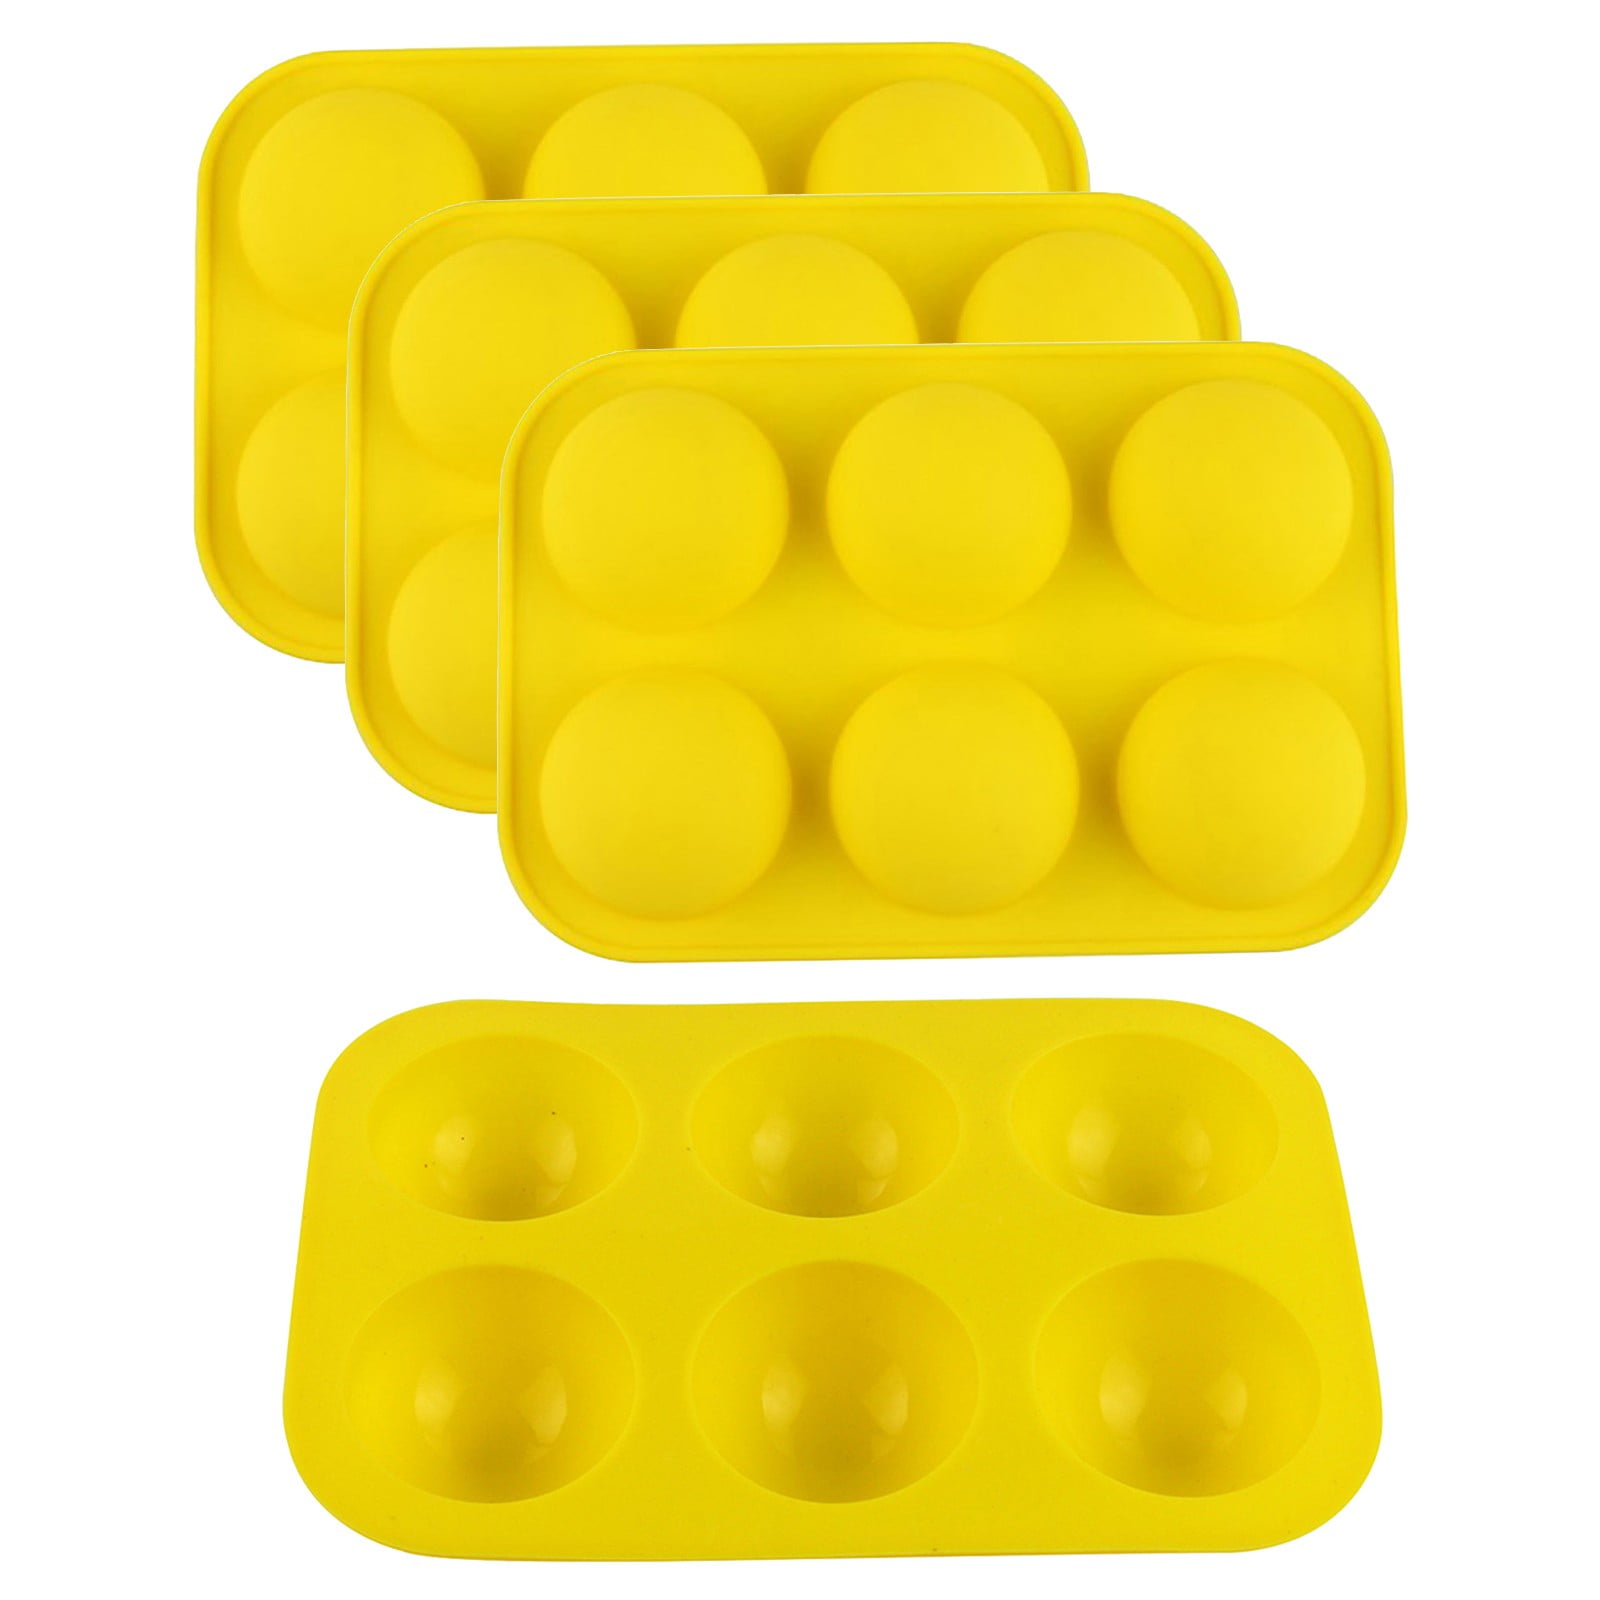 Half Ball Sphere Silicone Cake Mold Muffin Chocolate Baking Mould Cookie P L7E8